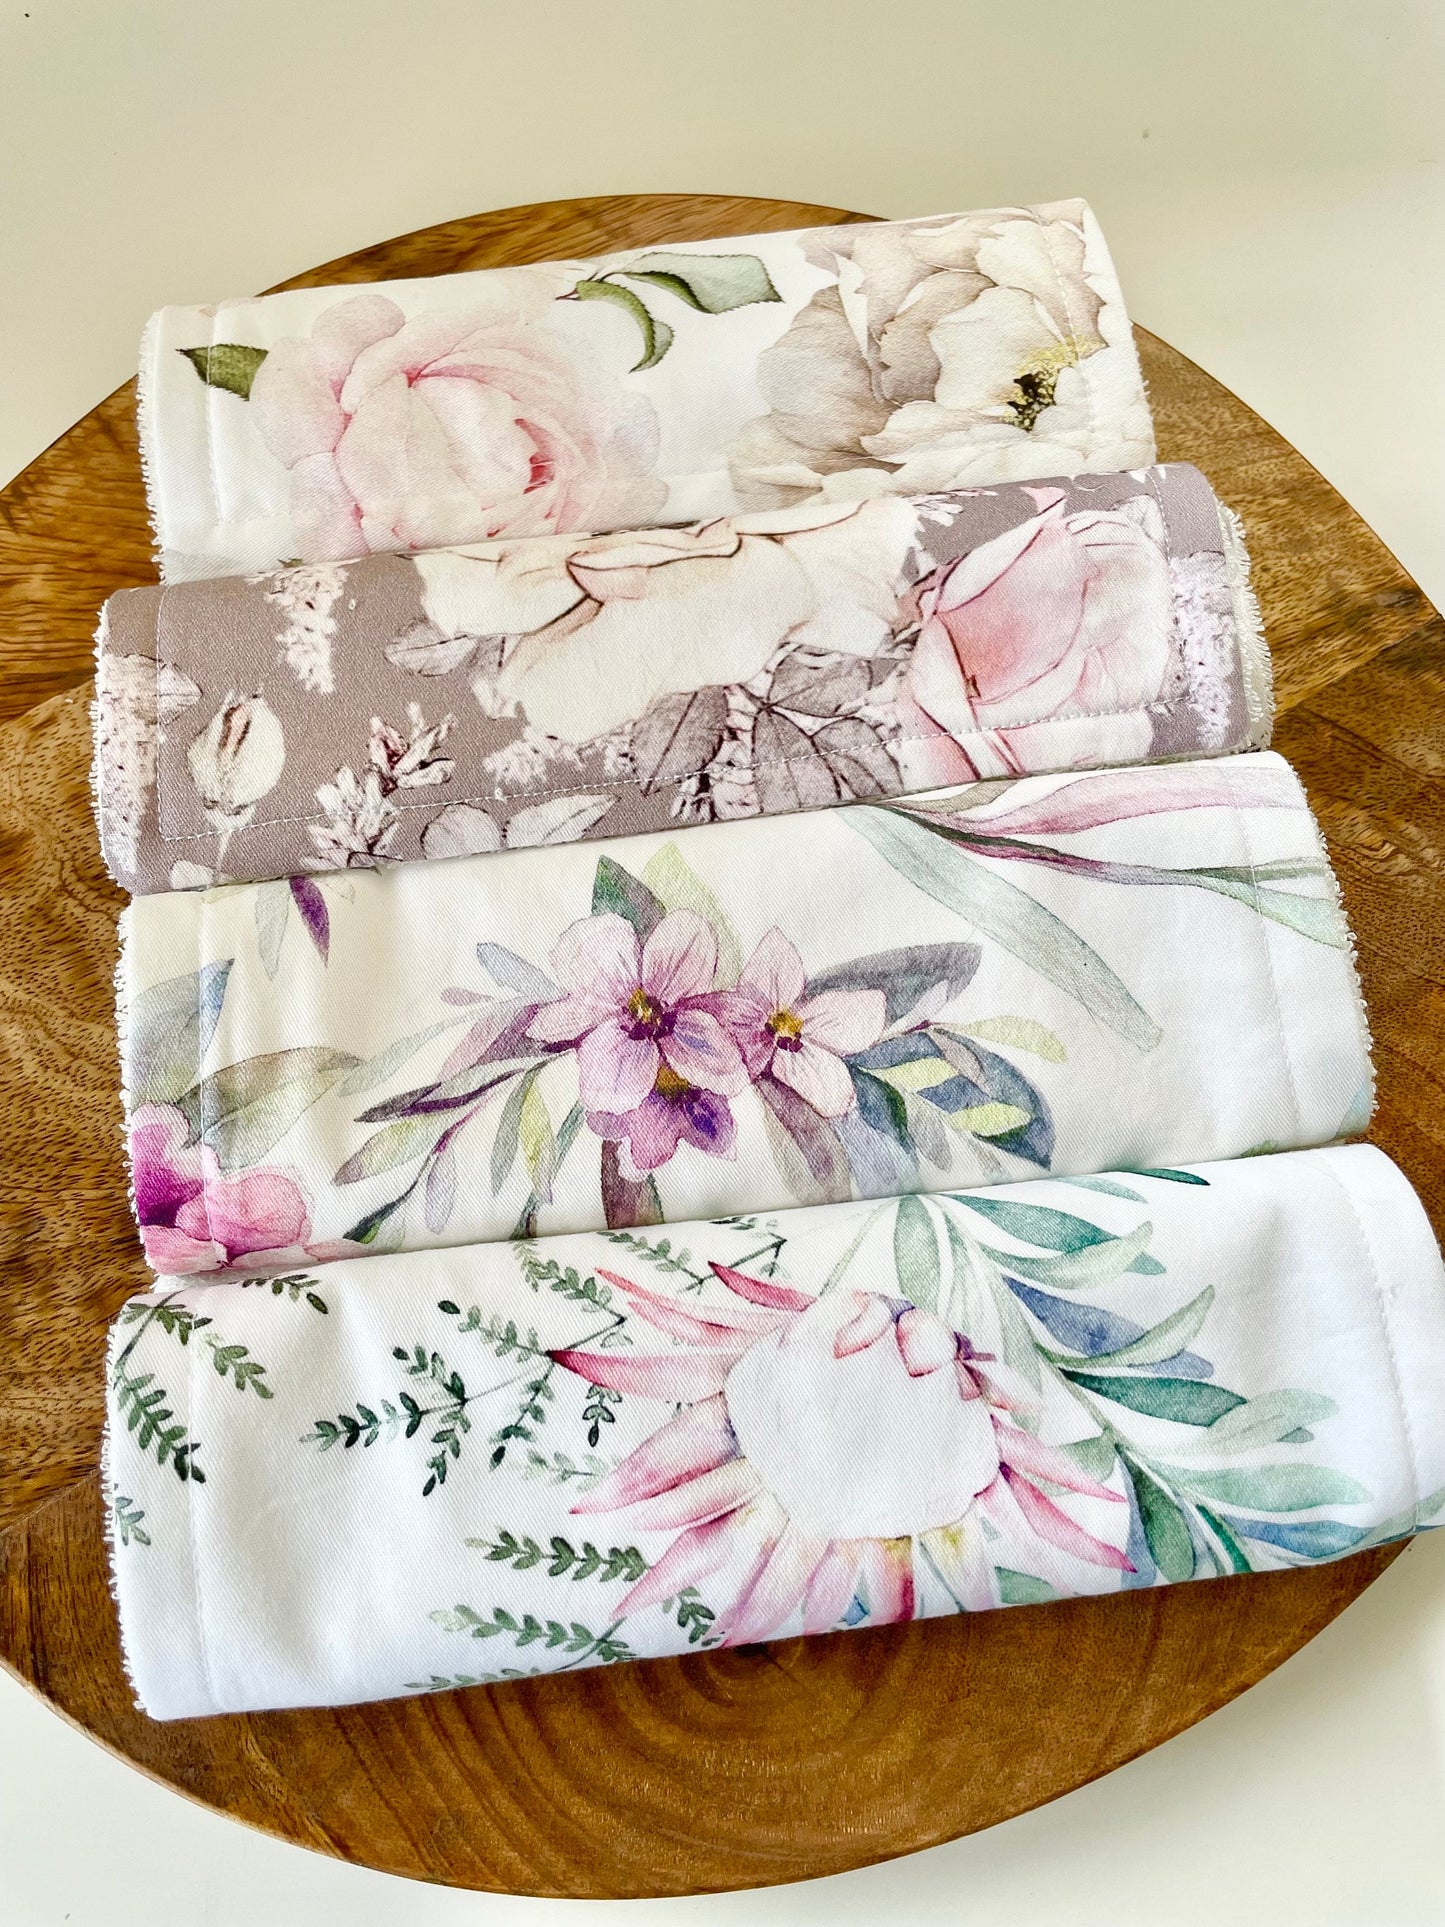 Wash Cloth organic bamboo cotton, floral baby wash bath cloth, face washer, reusable face wipes, baby girl gift, Olive & Miles - FREE POST